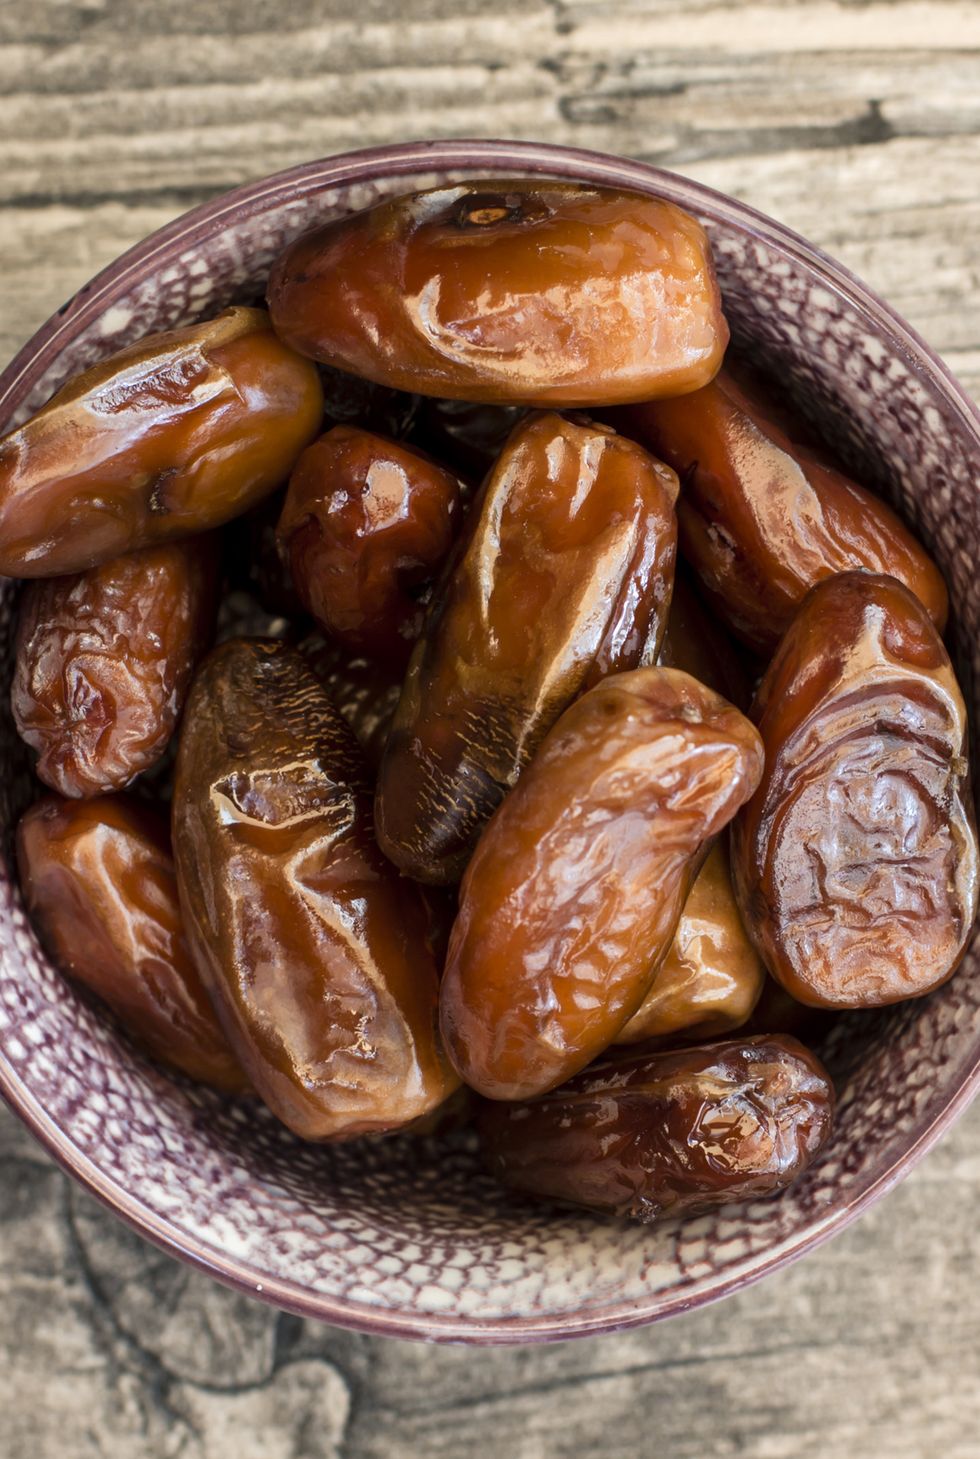 Bowl of dates on wood